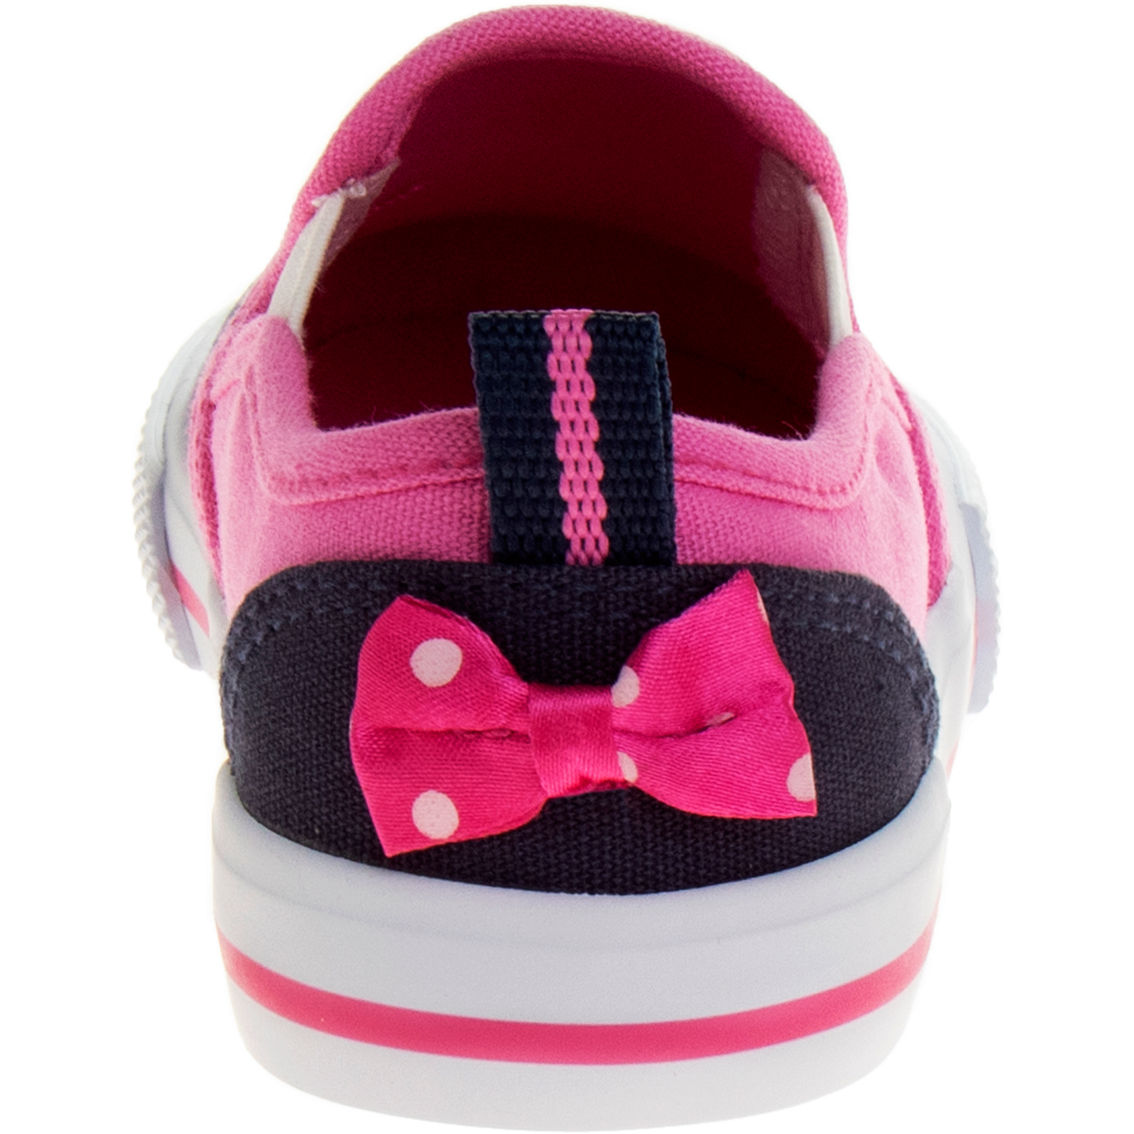 Disney Minnie Mouse Toddler Girls Slip On Sneakers - Image 5 of 5